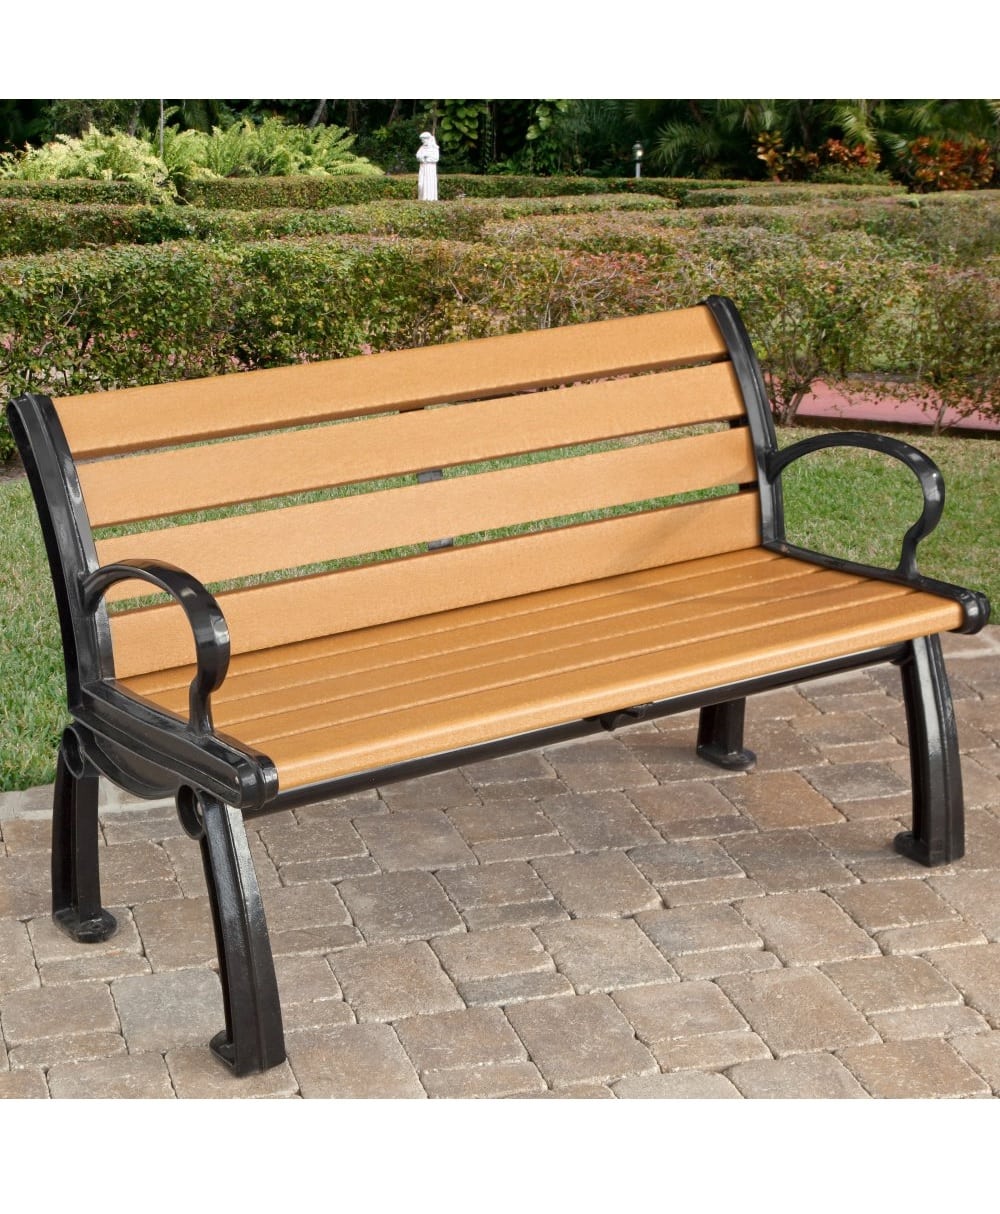 Heritage Recycled Plastic Bench Park, Recycled Plastic Outdoor Storage Bench